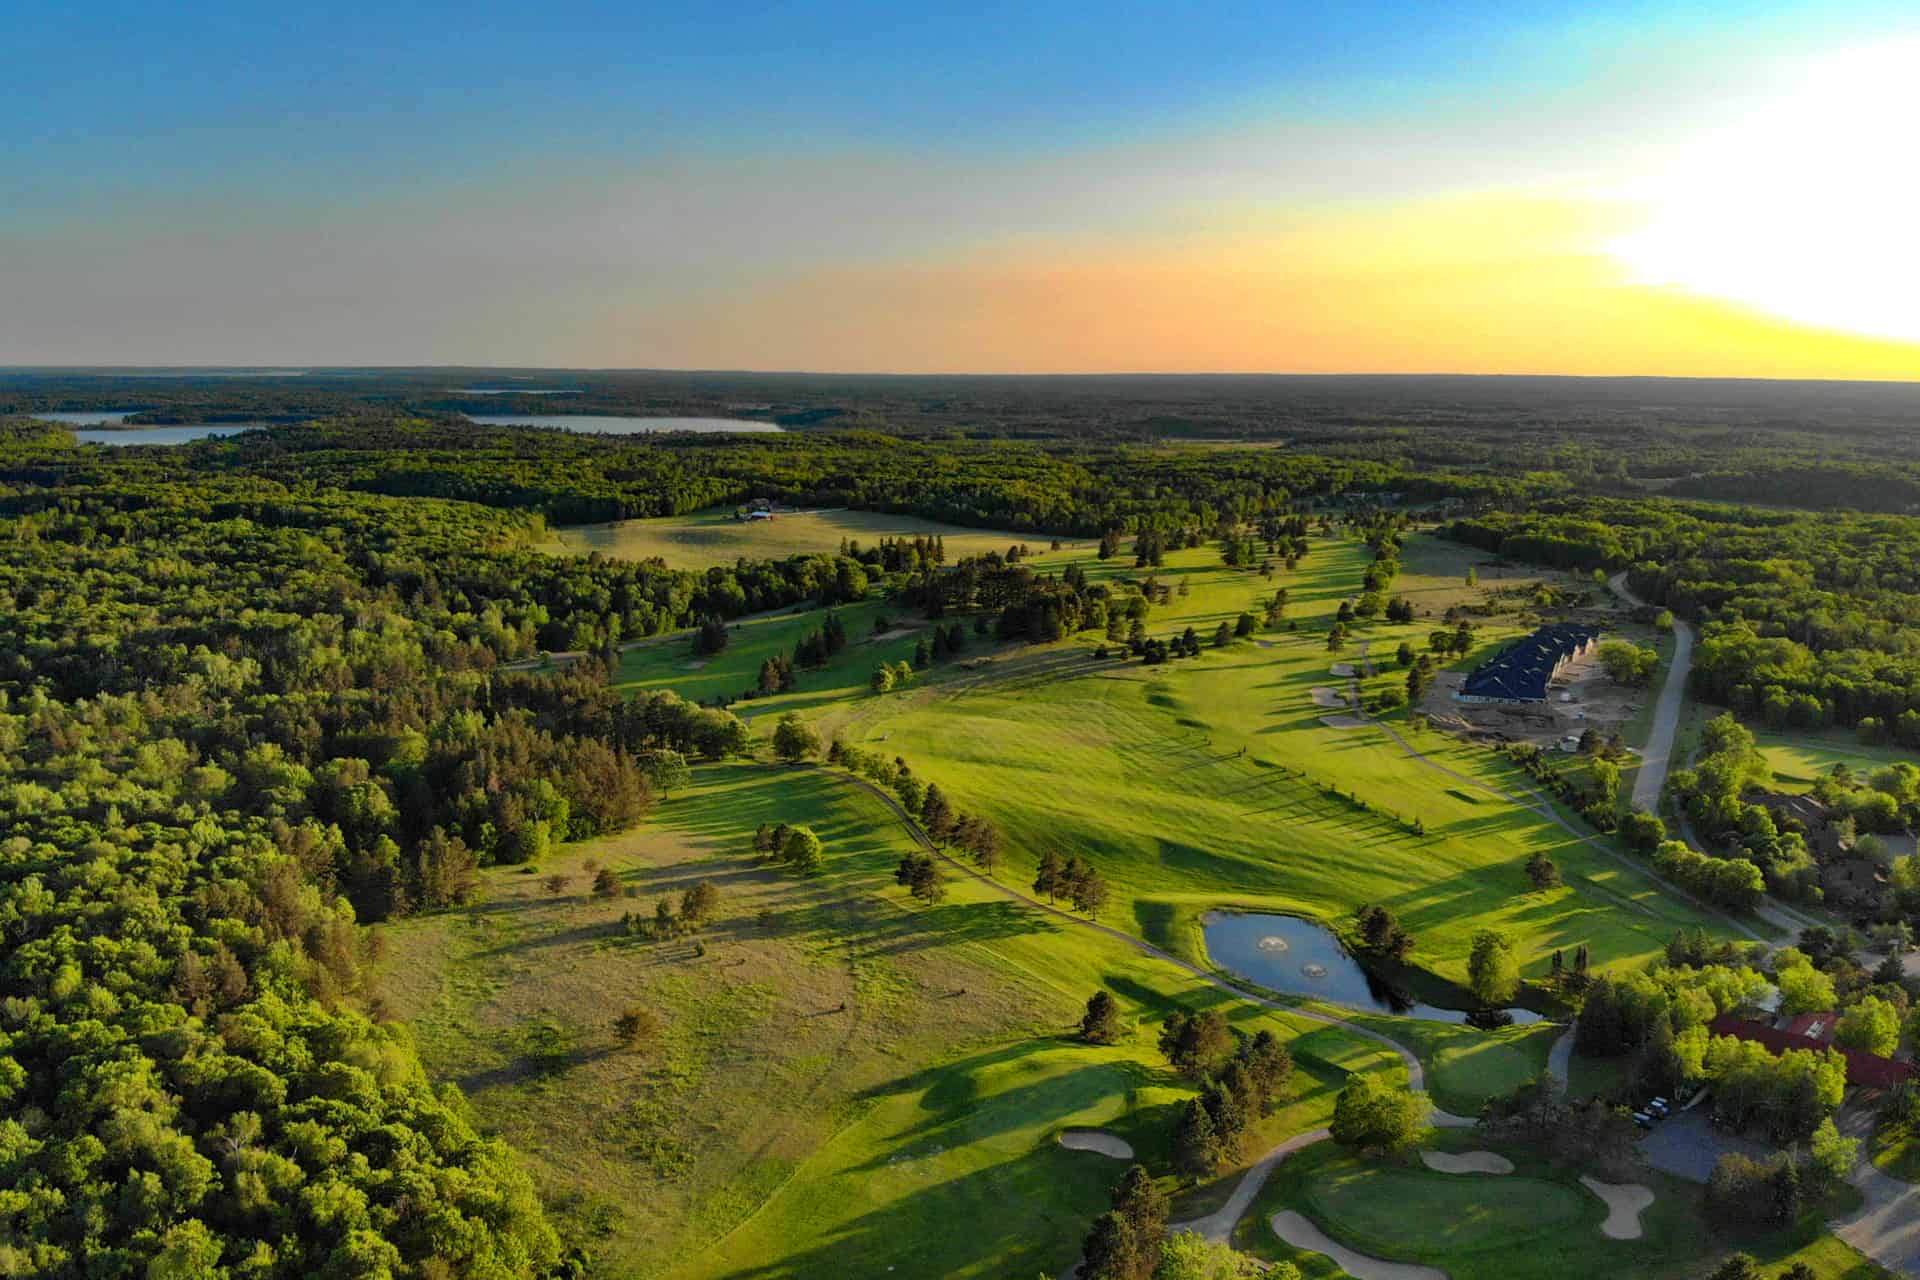 1920x1280 aerial photo taken at sunset of golf course next to forest